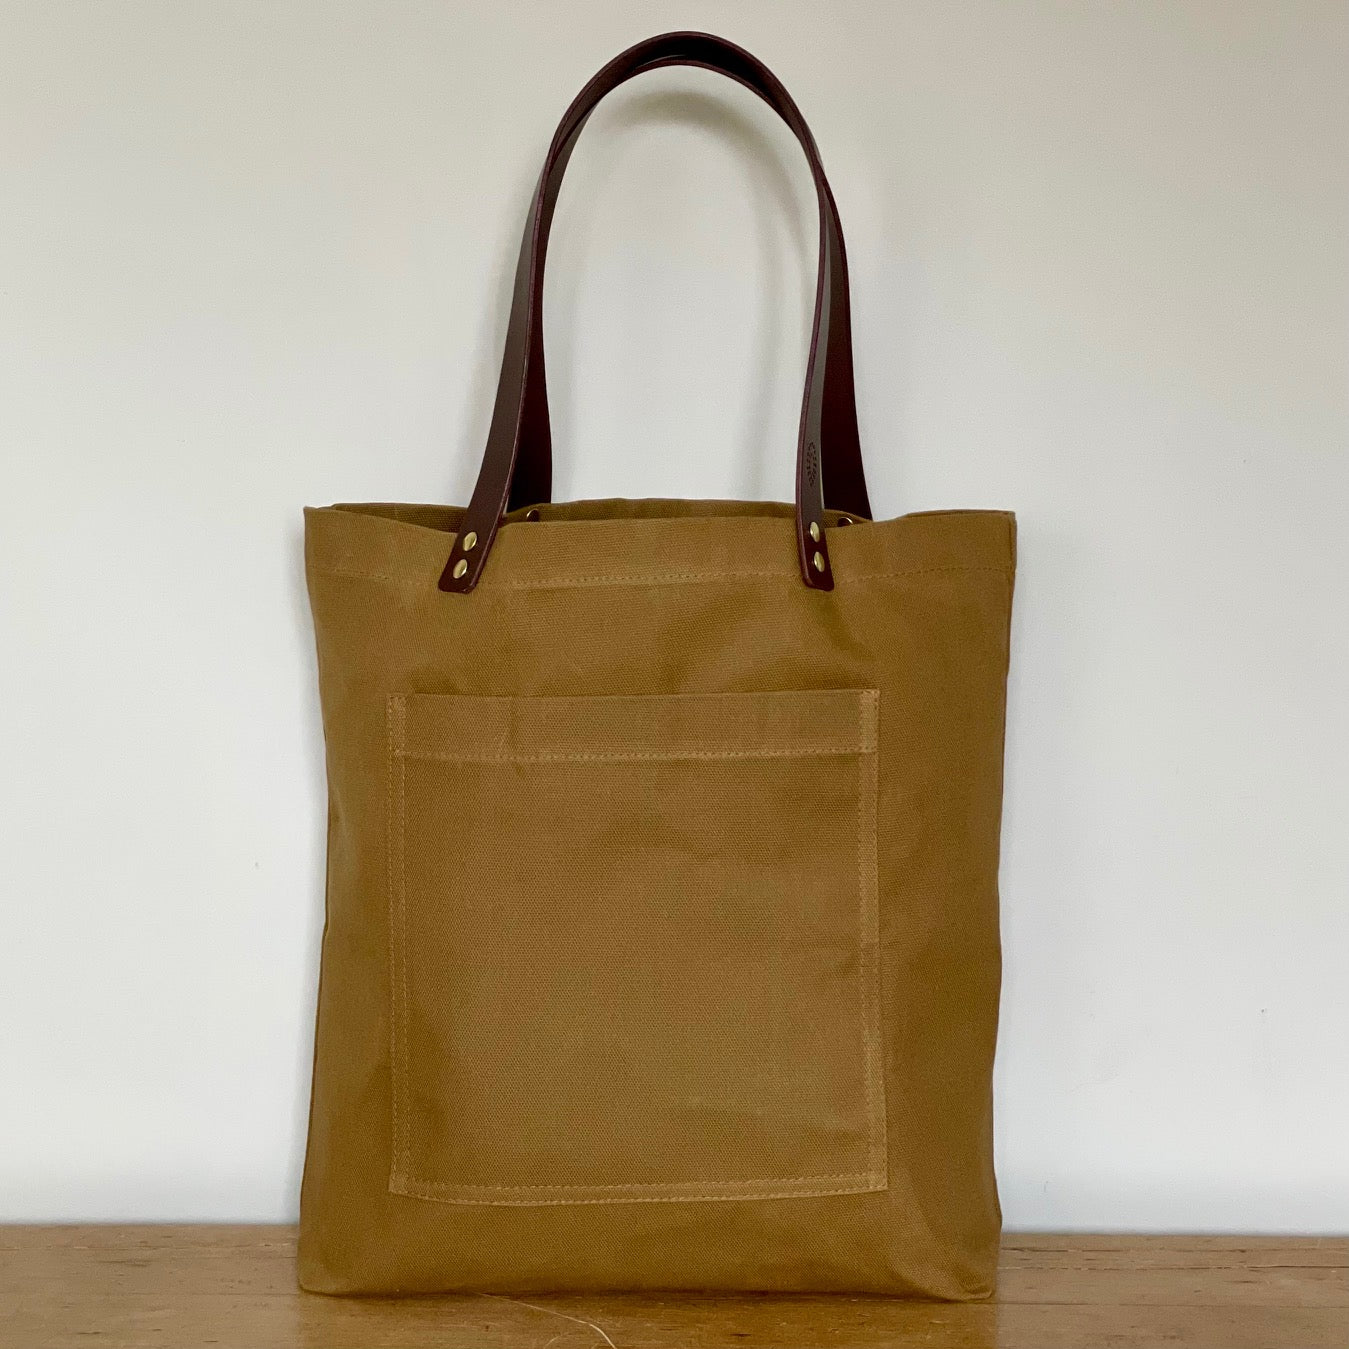 Mimi Eden Canvas and Leather Tote Bag